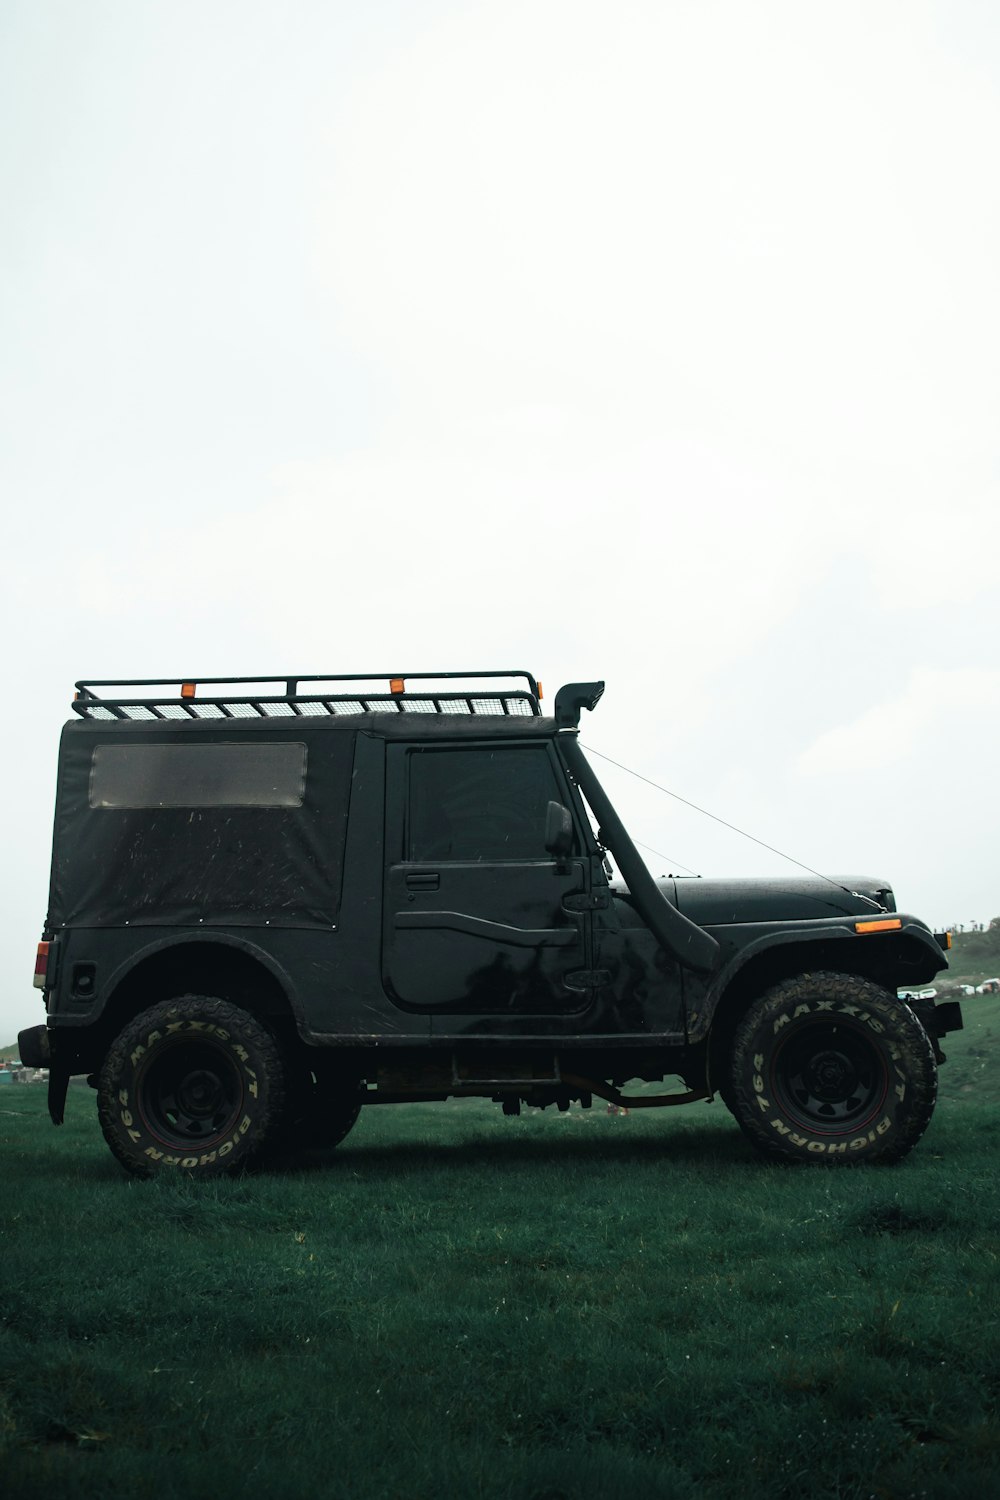 black and gray jeep wrangler on green grass field under white sky during daytime